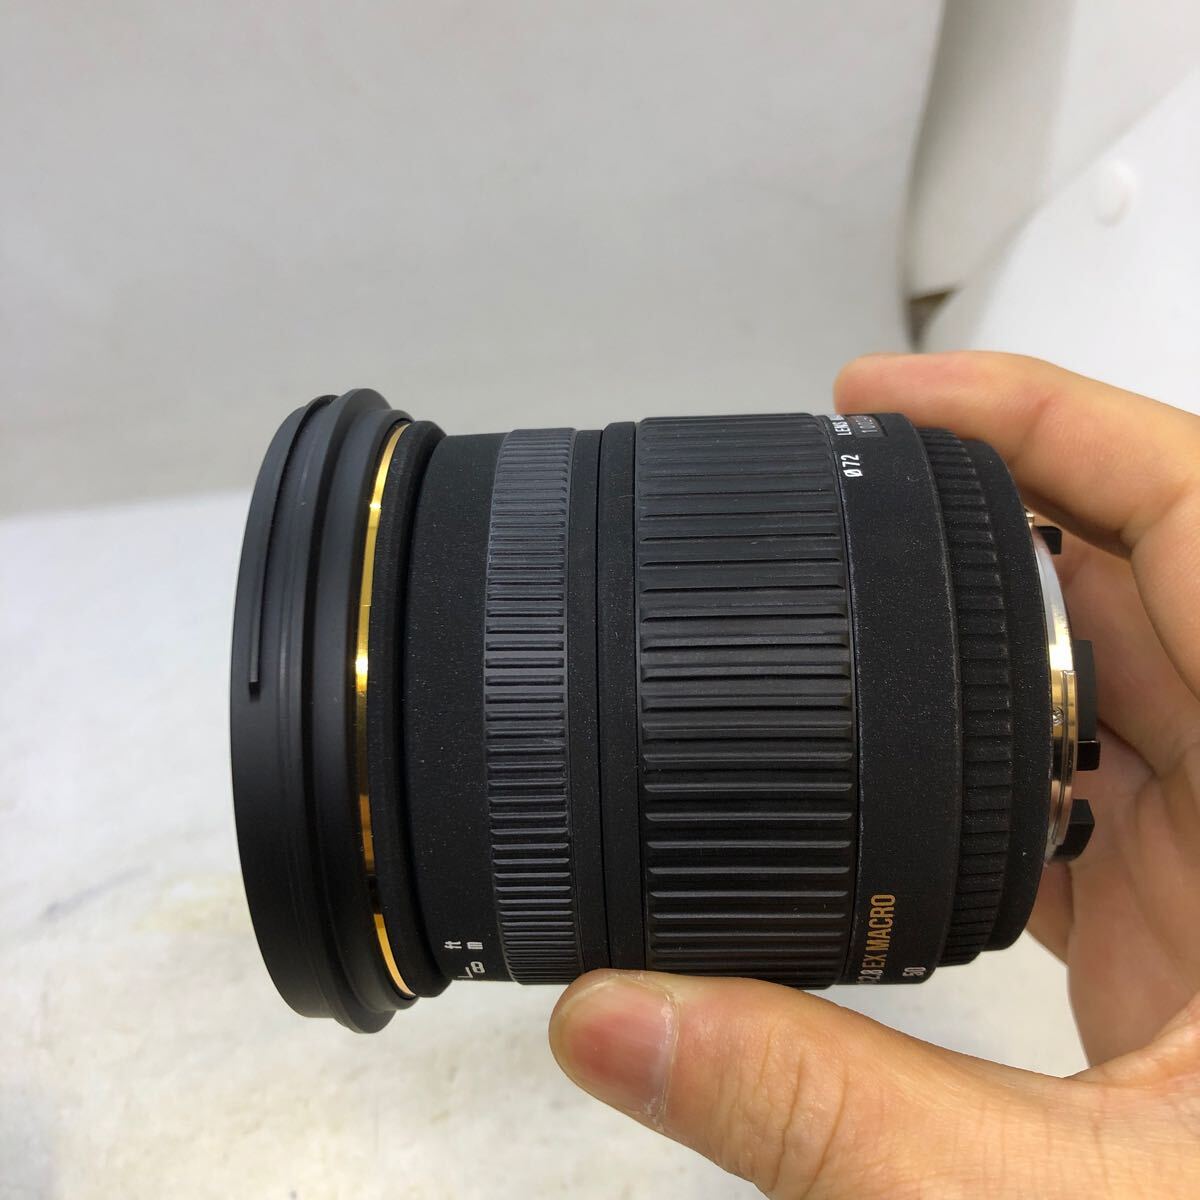 * finest quality beautiful goods * safety operation with guarantee * Sigma EX DC MACRO 18-50mm F2.8 Nikon/ Nikon F mount for exchange lens * finest quality optics * macro attaching!*